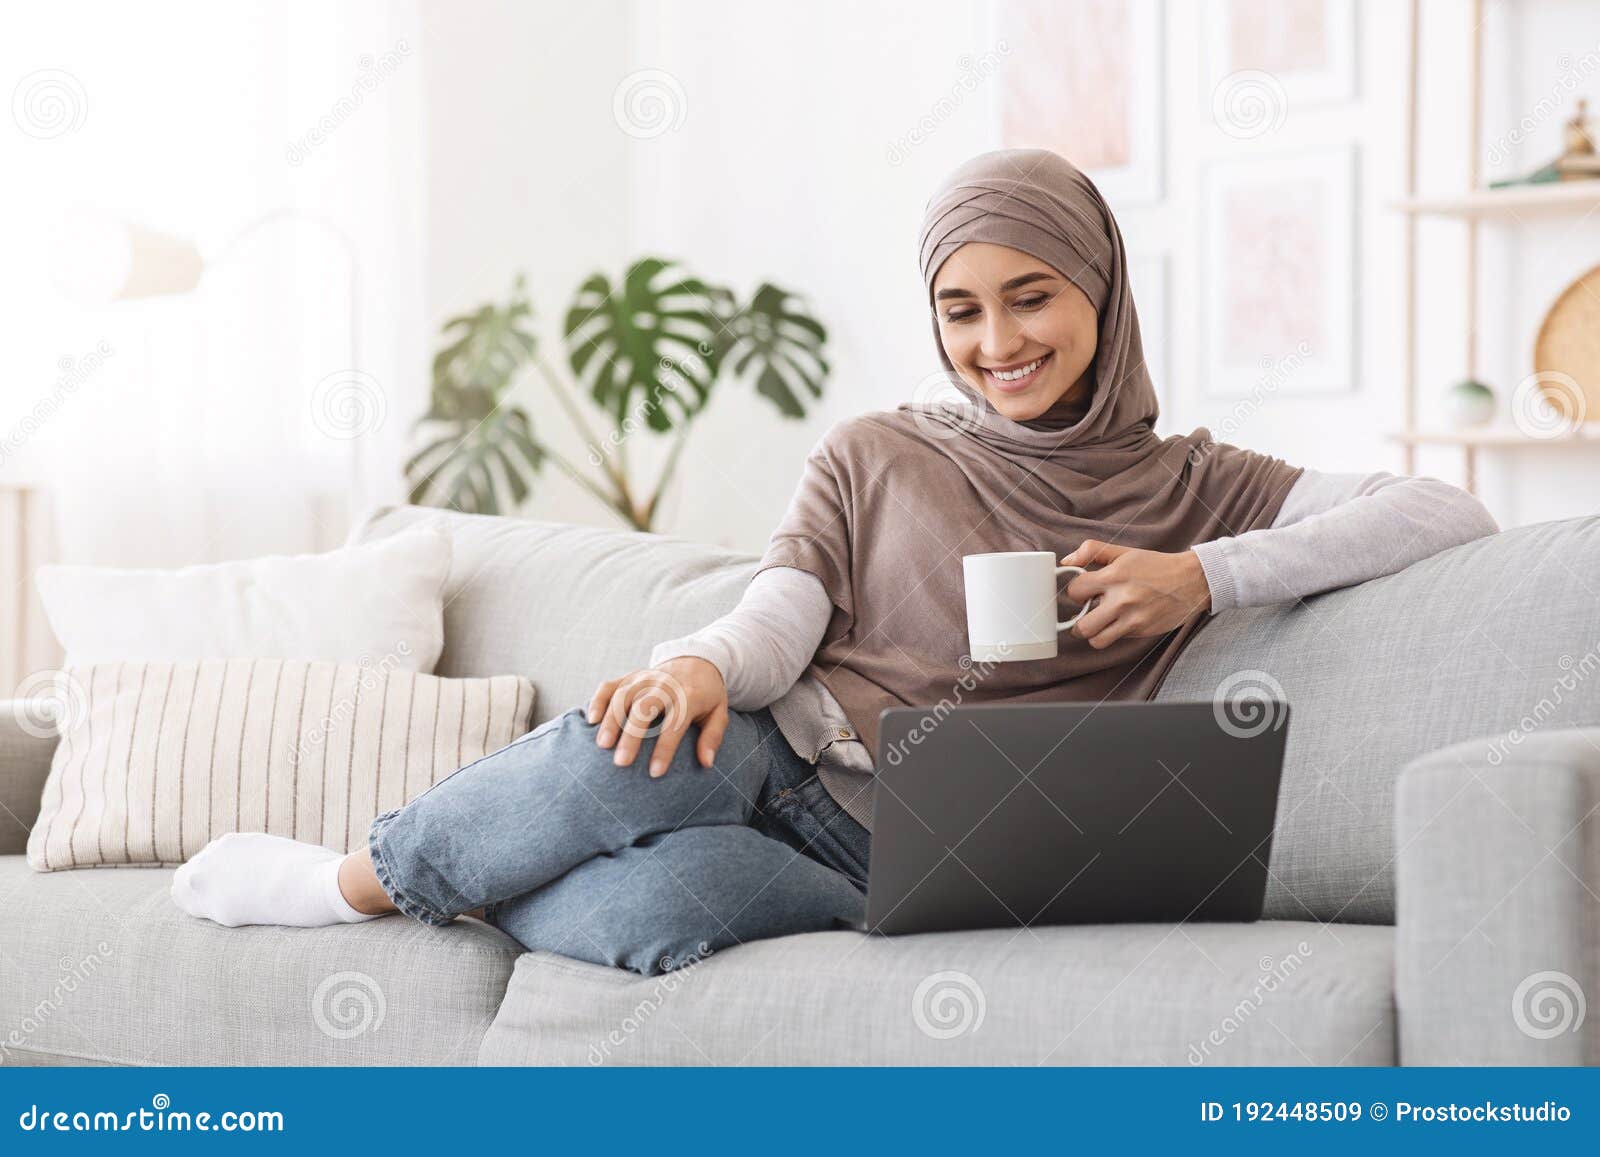 home passtime . cheerful arabic woman watching movies on laptop and drinking coffee